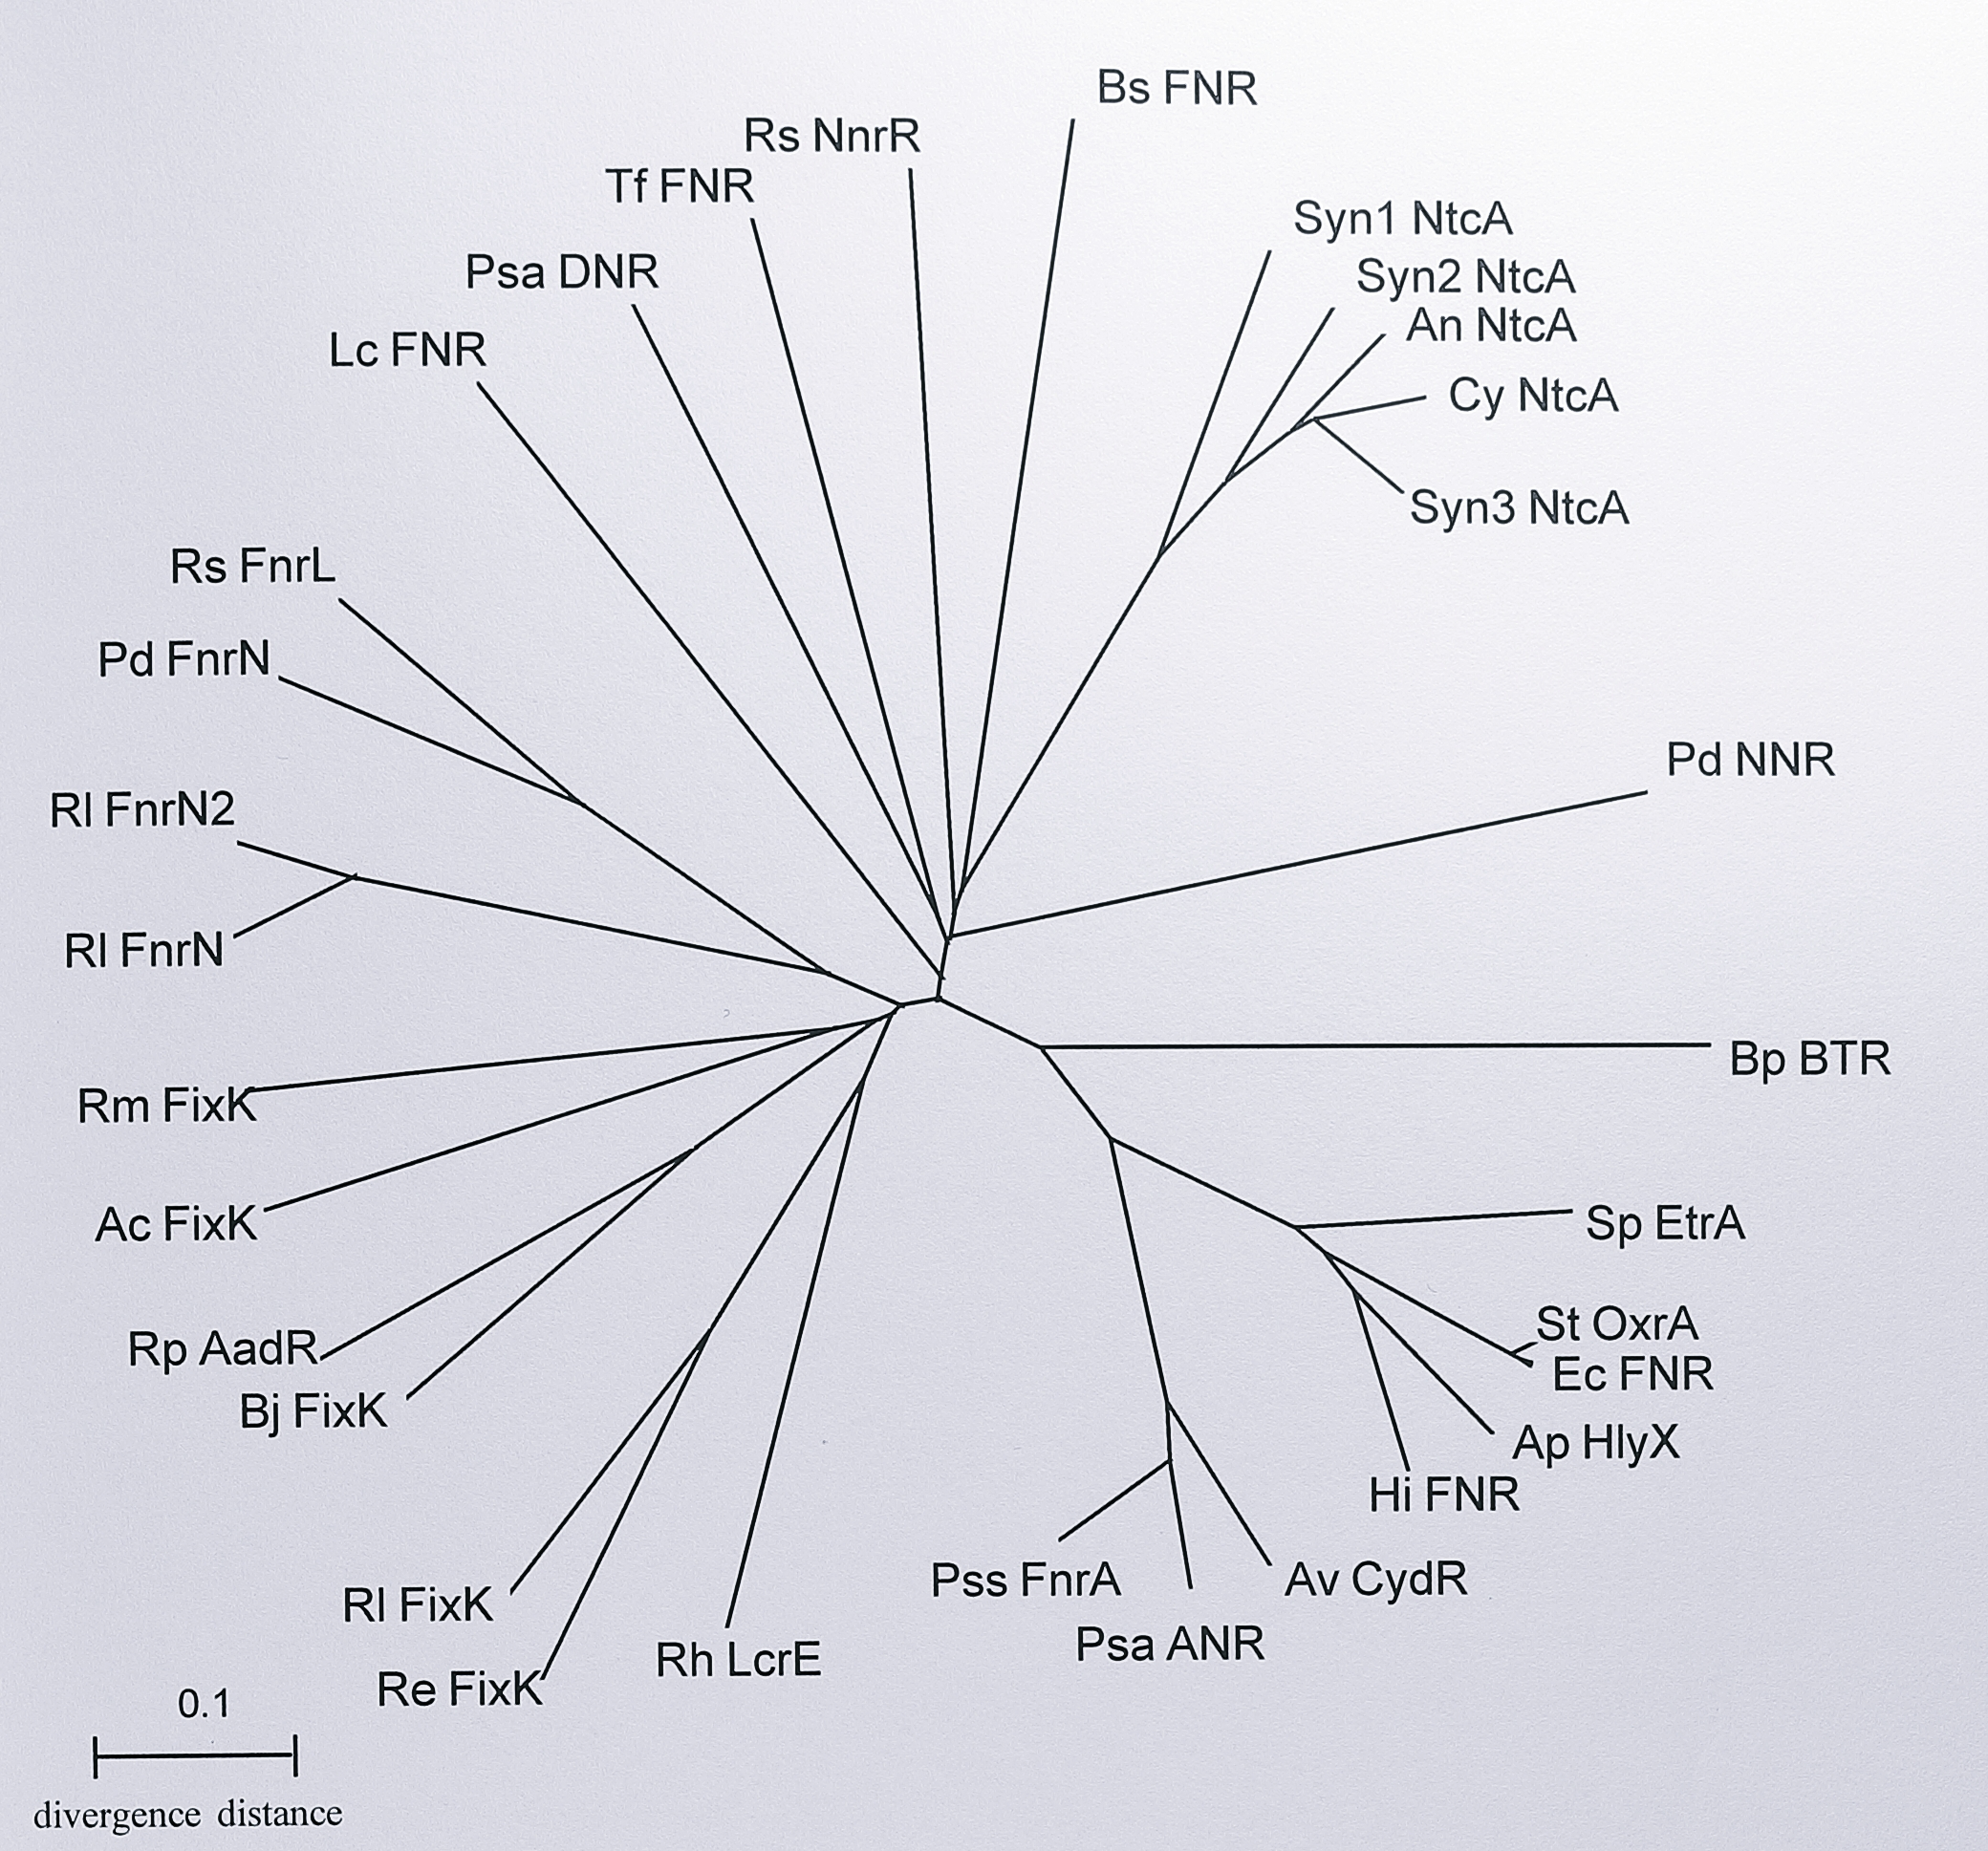 Unrooted phylogenetic tree of the FNR family of transcriptional activator proteins. Protein sequences that showed a high similarity to the FNR protein from _E. coli_ were retrieved from the GenBank database and aligned using the program Clustal W (Thompson _et al_. 1994 [@thompson_clustal_1994]). The phylogenetic tree was constructed by the method of neighbour-joining (Saitou and Nei, 1987 [@saitou_neighbor-joining_1987]) and analysed by bootstrapping (Felsenstein, 1985 [@felsenstein_confidence_1985]) using 1000 trials. The final tree was displayed using the program Treeview (Page, 1996 [@page_treeview_1996]). More details of these methods are given in Chapter 3. The tree shows that the FNR family falls into three main groups (van Spanning _et al_., 1997 [@van_spanning_fnrp_1997]): (A) the FNR subgroup, (B) the FixK subgroup and (C) the NNR subgroup. The FixK subgroup can be subdivided further into two groups, depending on the presence of an N-terminal cysteine cluster (van Spanning _et al_., 1997 [@van_spanning_fnrp_1997]). The NtcA proteins (Frías _et al_. 1993 [@frias_general_1993]) also cluster together within the NNR subgroup. Abbreviations: Syn1, _Synechococcus_ sp. WH7803, Psa, _Pseudomonas aeruginosa_, Ec, _Escherichia coli_, Sp, _Shewanella putrefaciens_, Bp, _Bordetella pertussis_, Av, _Azotobacter vinelandii_, Rh, _Rhizobium_ sp. IC3342, Ap, _Actinobacillus pleuropneumoniae_, Bj, _Bradyrhizobium japonicum_, Rp, _Rhodopseudomonas palustris_, Pd, _Paracoccus denitrificans_, St, _Salmonella typhimurium_, Rl, _Rhizobium leguminosarum_, Hi, _Haemophilus influenzae_, Rs, _Rhodobacter sphaeroides_, Tf, _Thiobacillus ferrooxidans_, Re, _Rhizobium etli_, Cy, _Cyanothece_ sp. ATCC 51142, Ac, _Azorhizobium caulinodans_, Syn2, _Synechococcus_ sp. PCC 7942, Syn3, _Synechocystis_ sp. PCC 6803, An, _Anabaena_ sp. PCC 7120, Rm, _Rhizobium meliloti_, Pss, _Pseudomonas stutzeri_ Zobell, Bs, _Bacillus subtilis_.